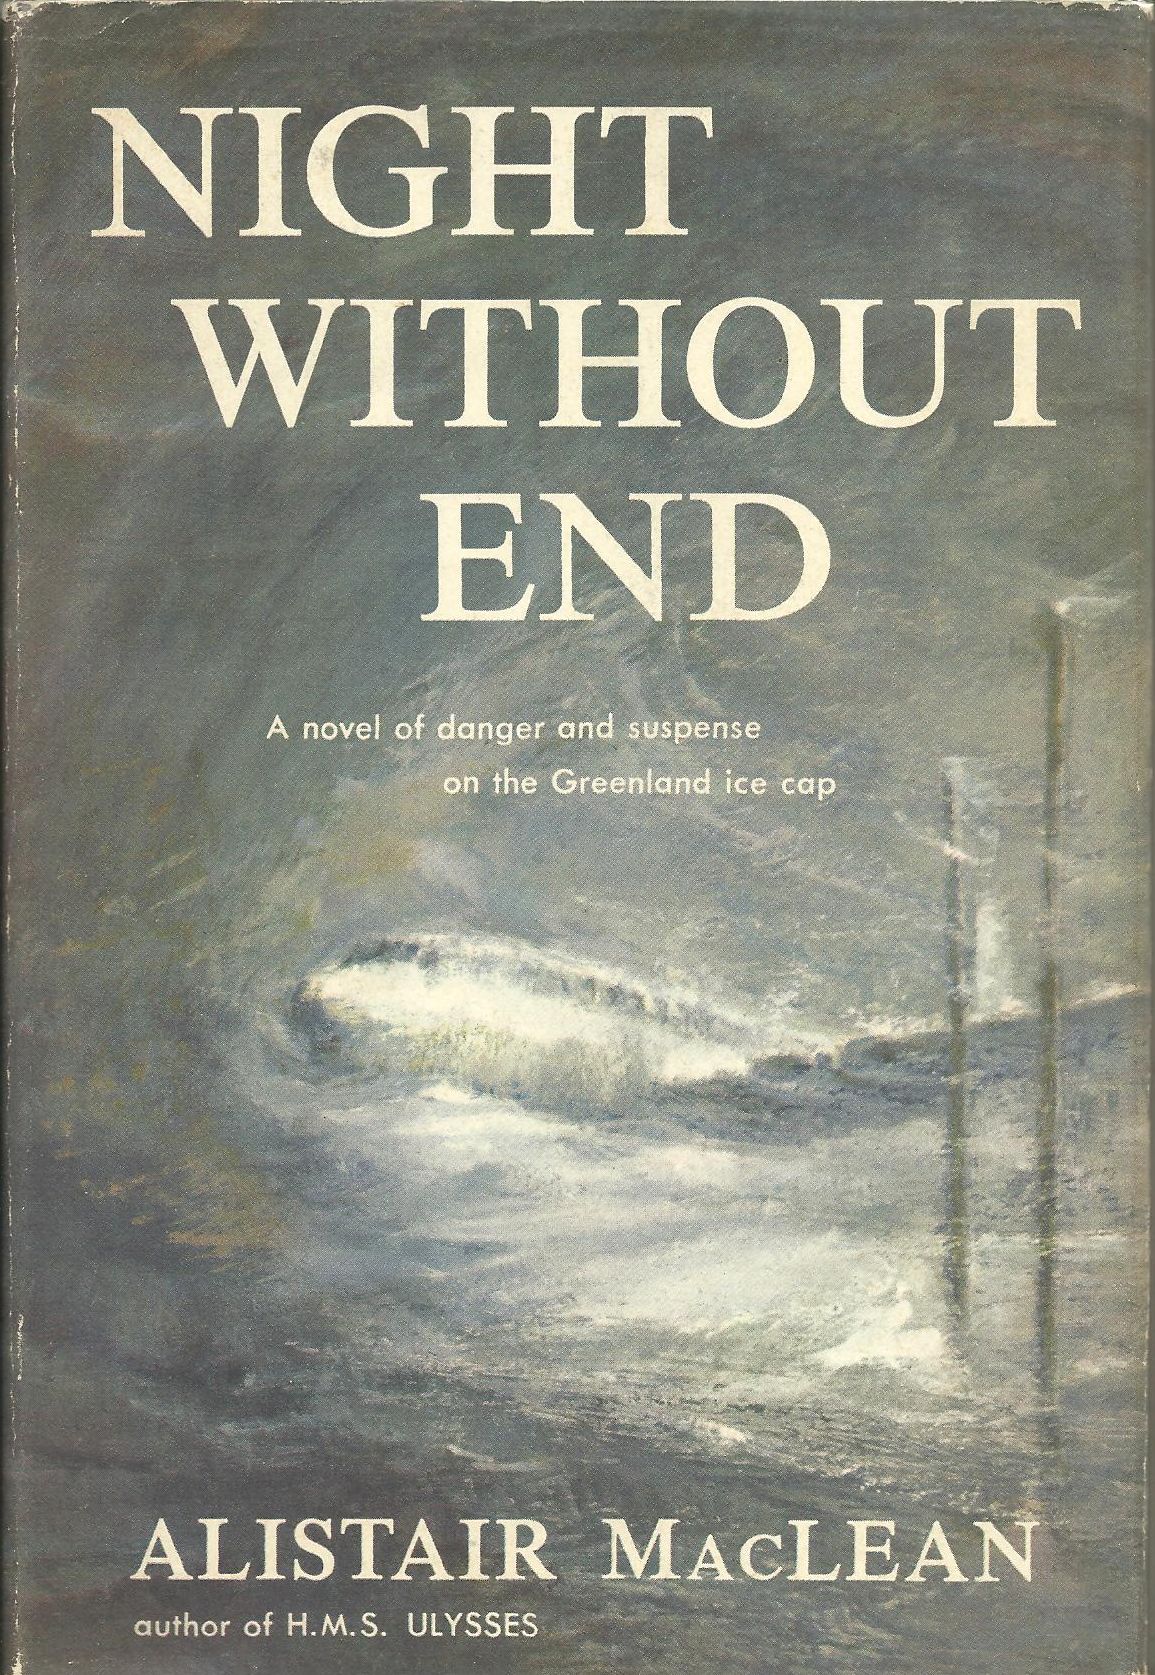 Night Without End - US first edition